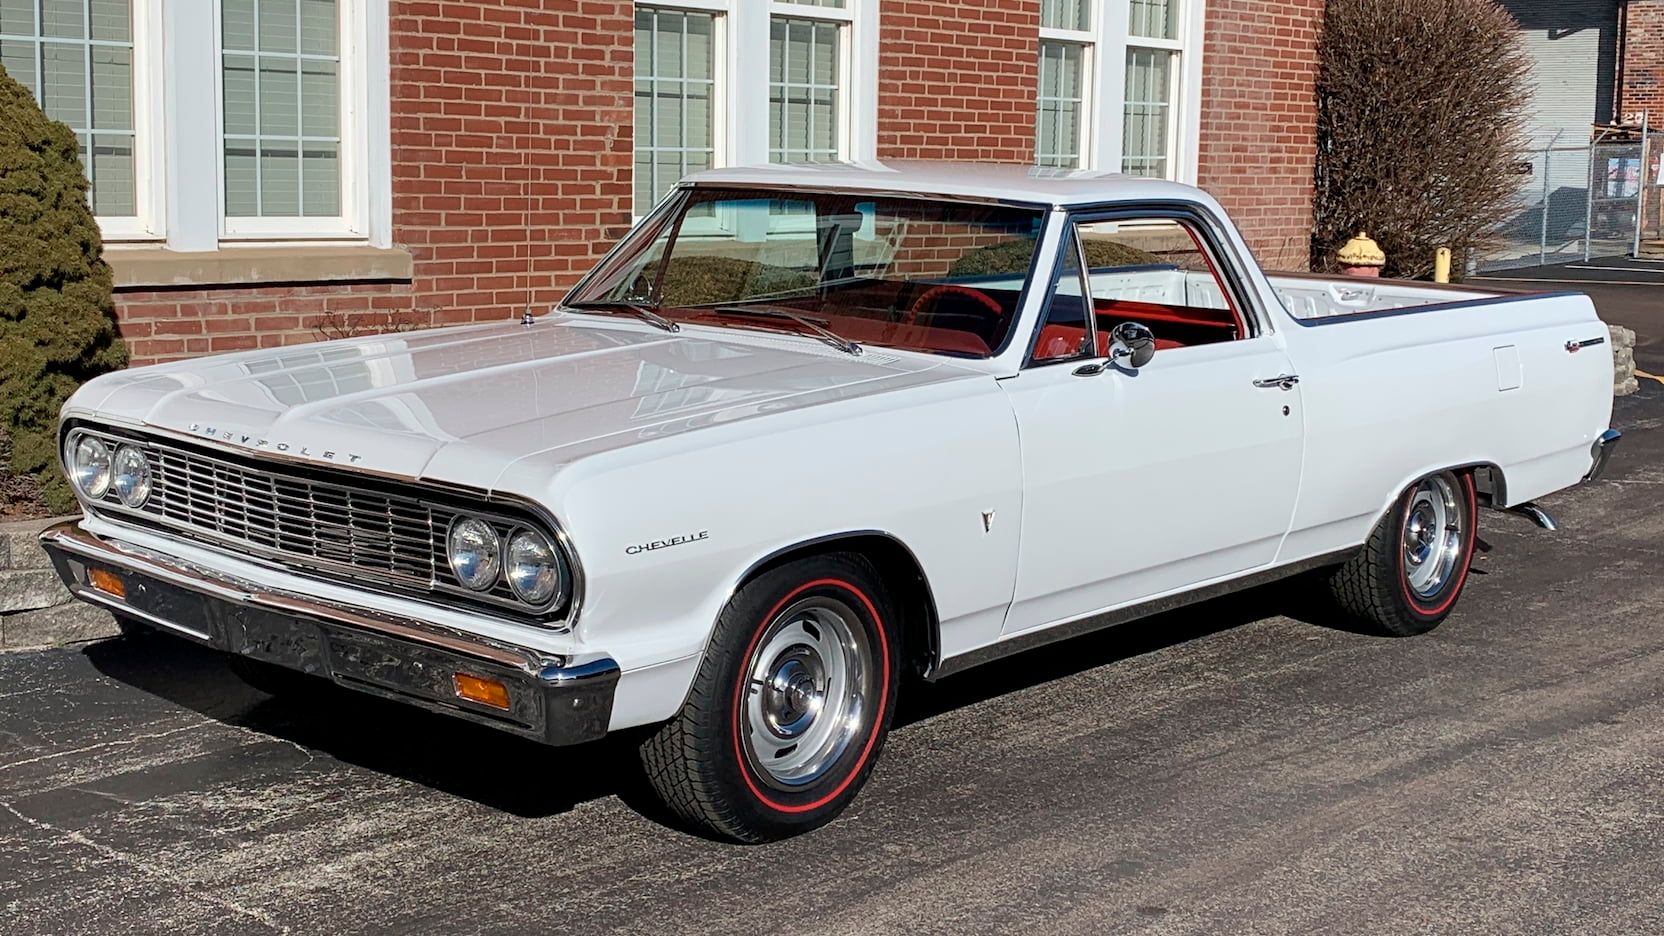 A parked white 1964 Chevy El Camino